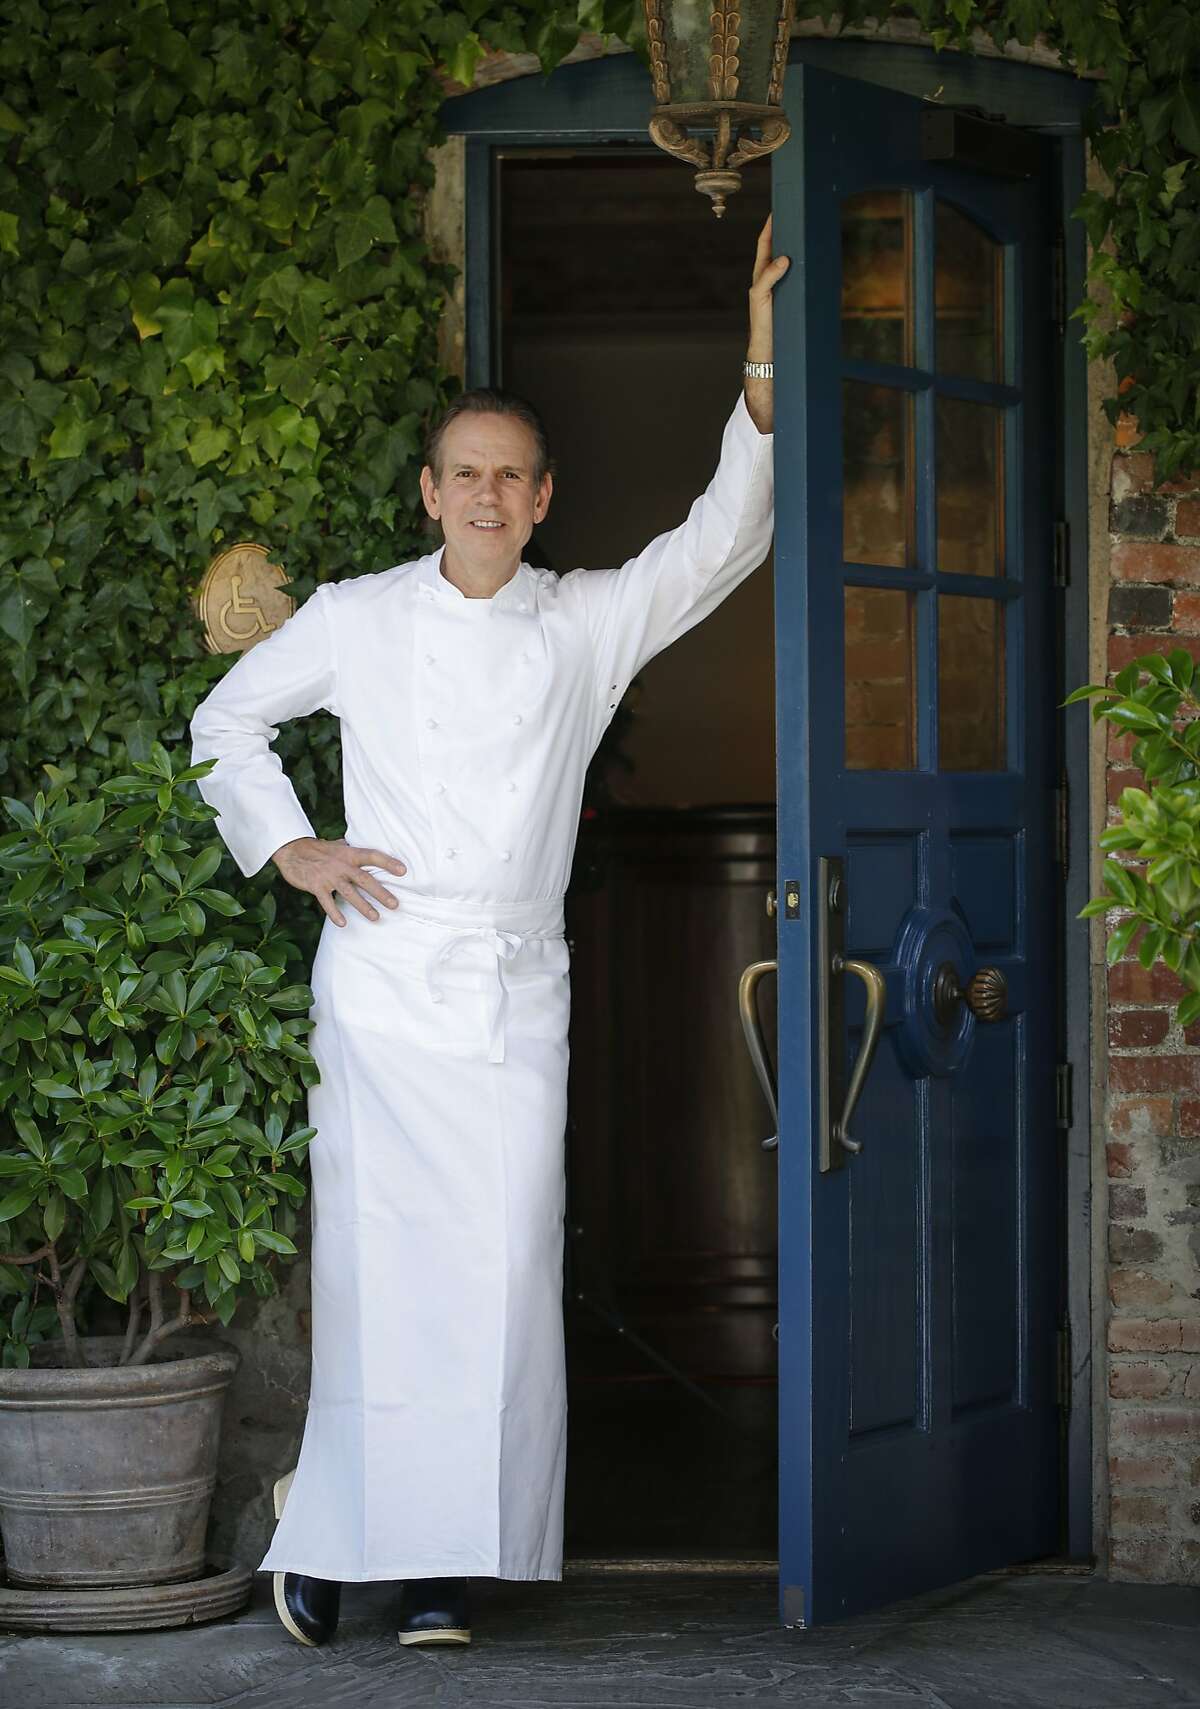 Chef Thomas Keller stands in the doorway of The French Laundry on Wednesday, April 16, 2014 in Yountville, Calif.